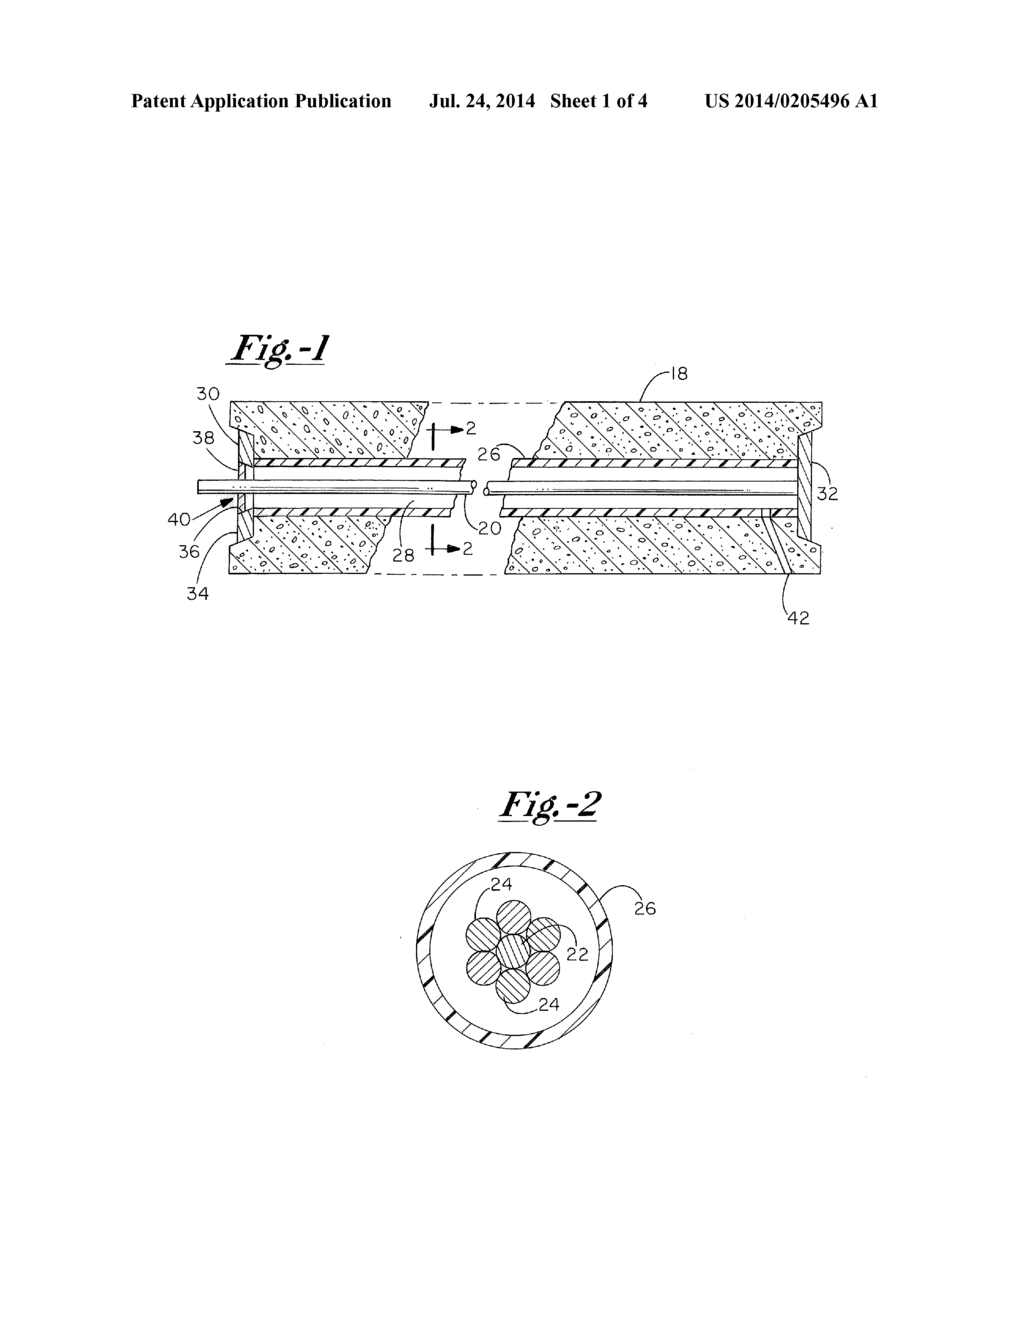 Corrosion Inhibiting Vapor for Use in Connection with Encased Articles - diagram, schematic, and image 02